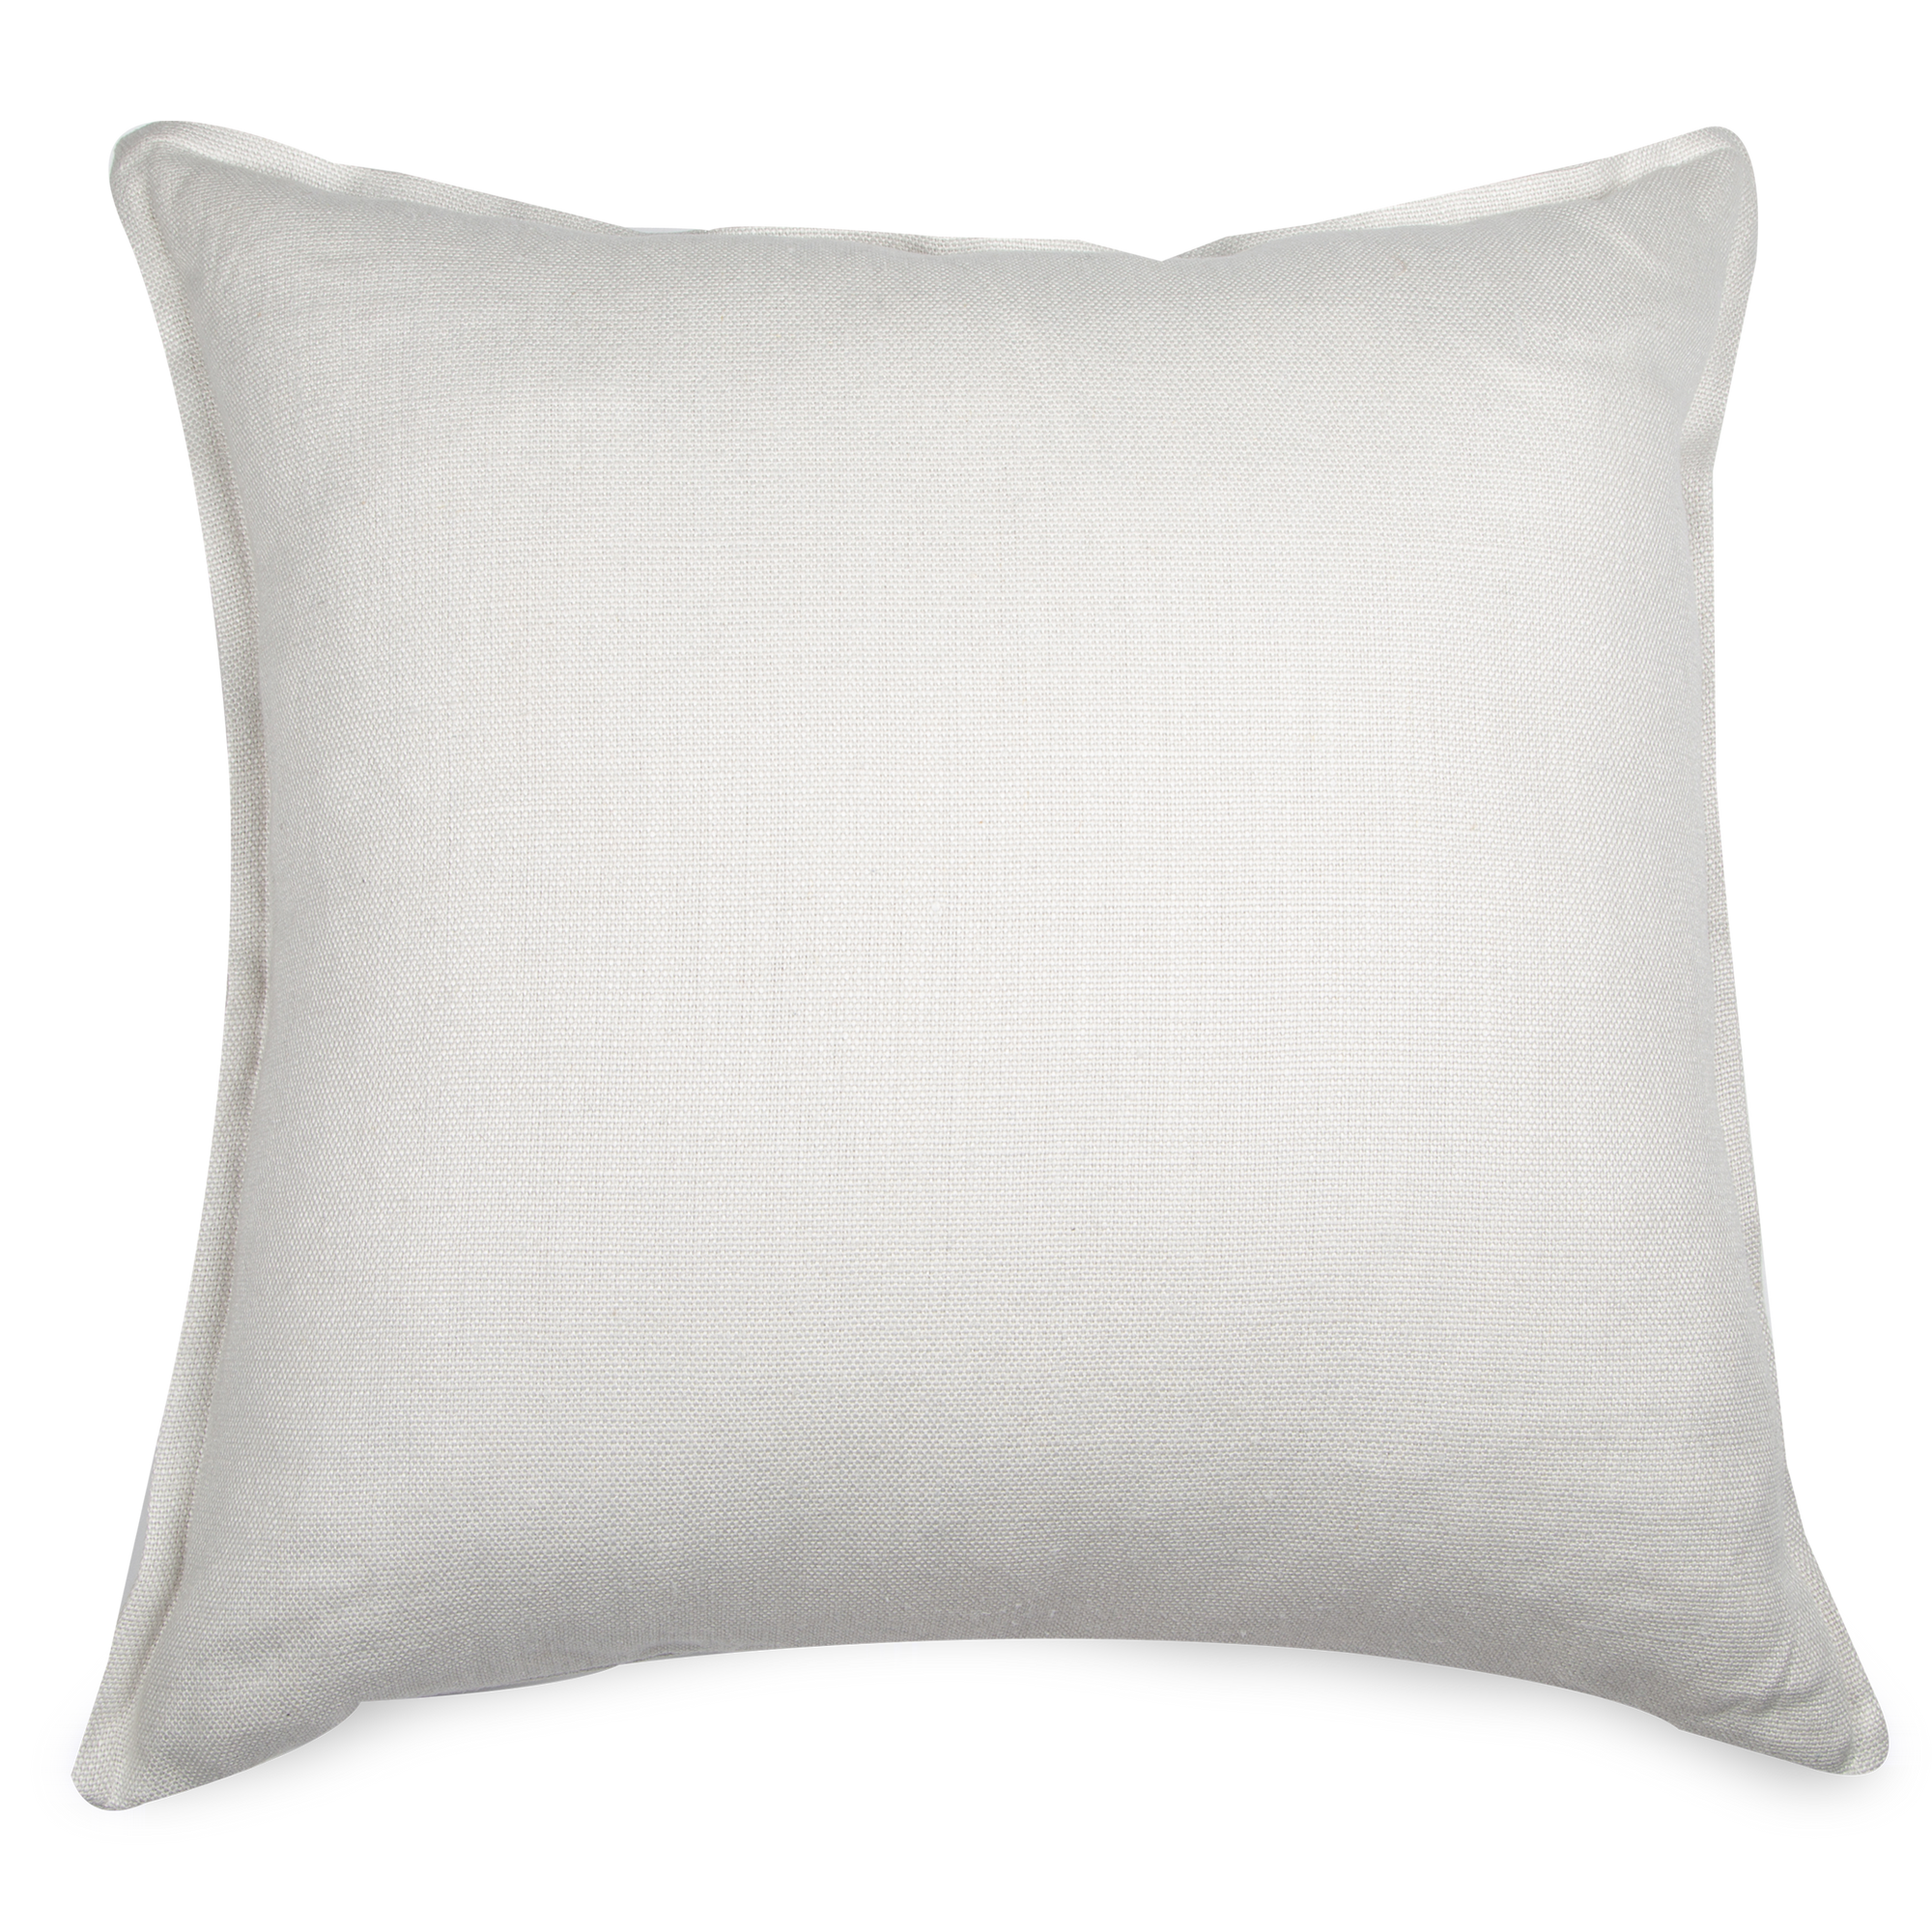 The Slubby Linen Pillow features a solid base colour contrasting with a neutral coloured half-inch flange and corner pleats.